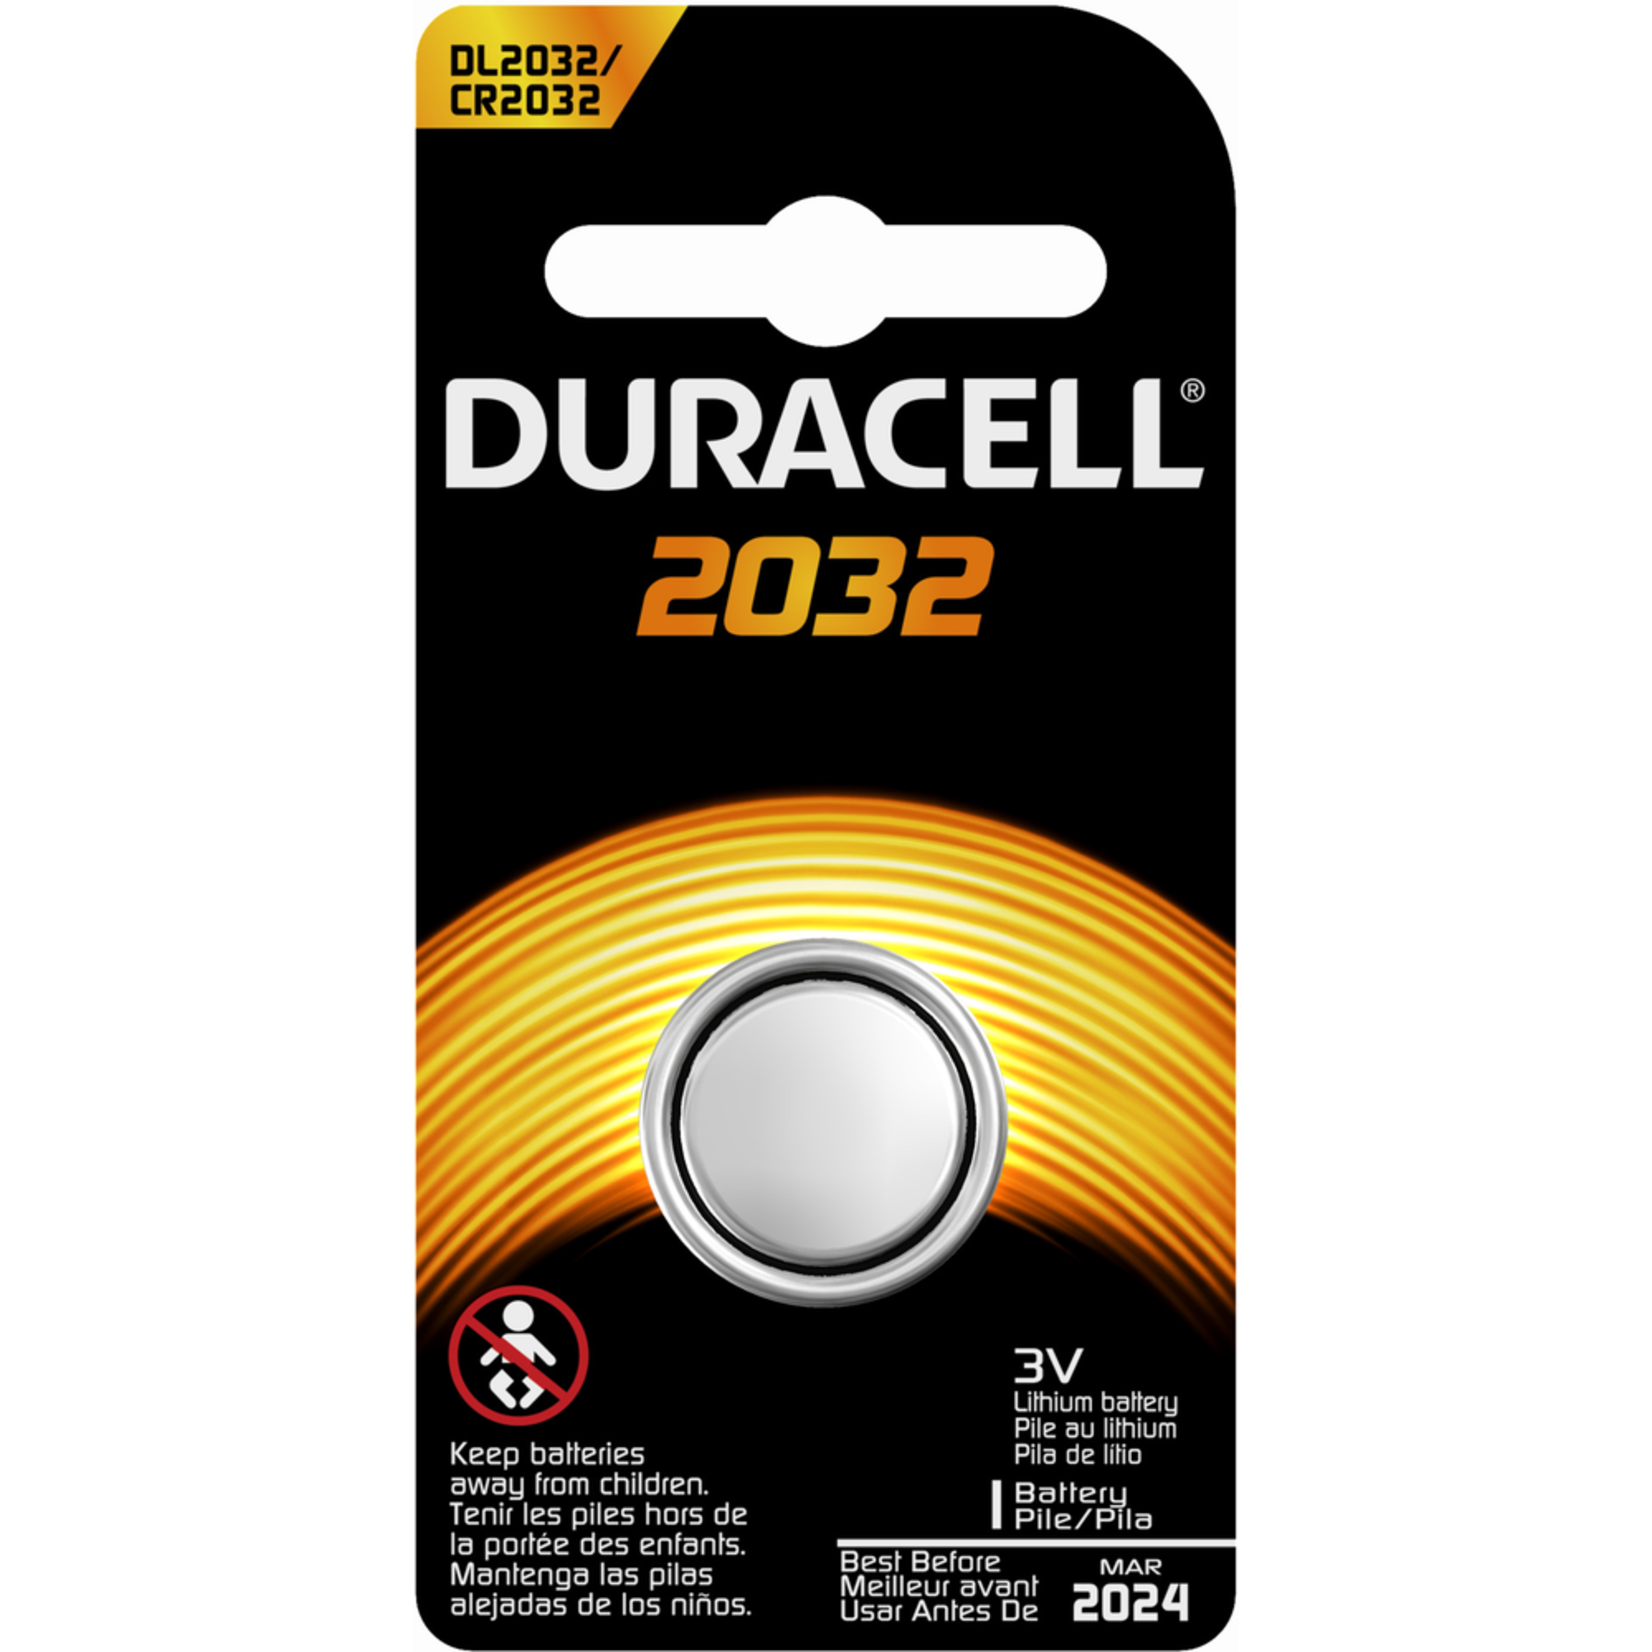 Duracell Duracell 3V 2032 Lithium Battery